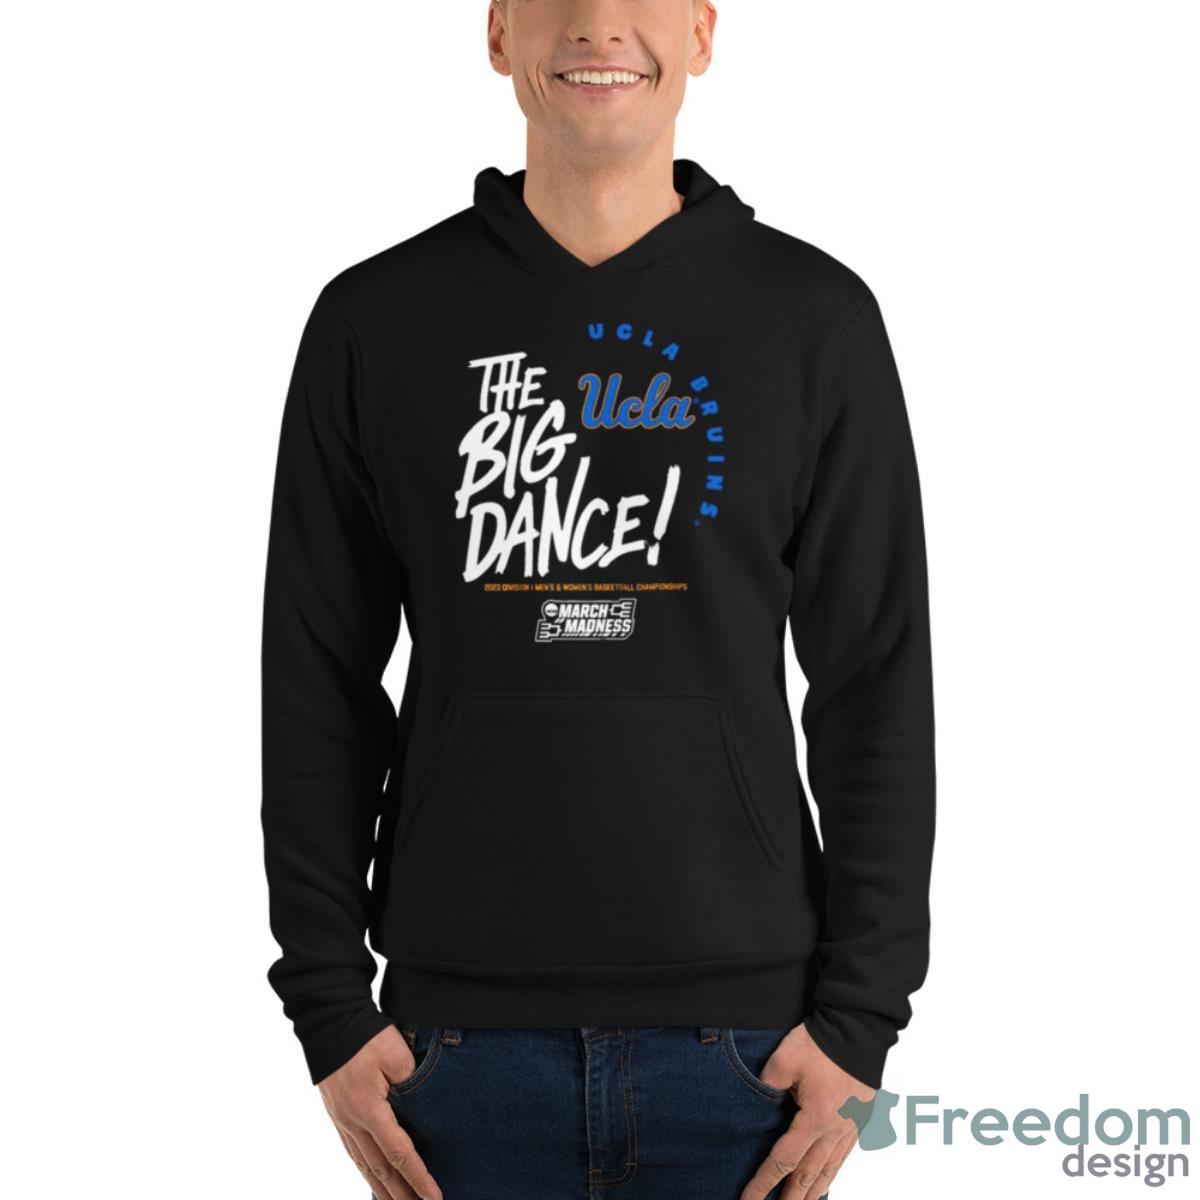 UCLA Bruins the big dance March Madness 2023 Division men’s and women’s basketball championship shirt